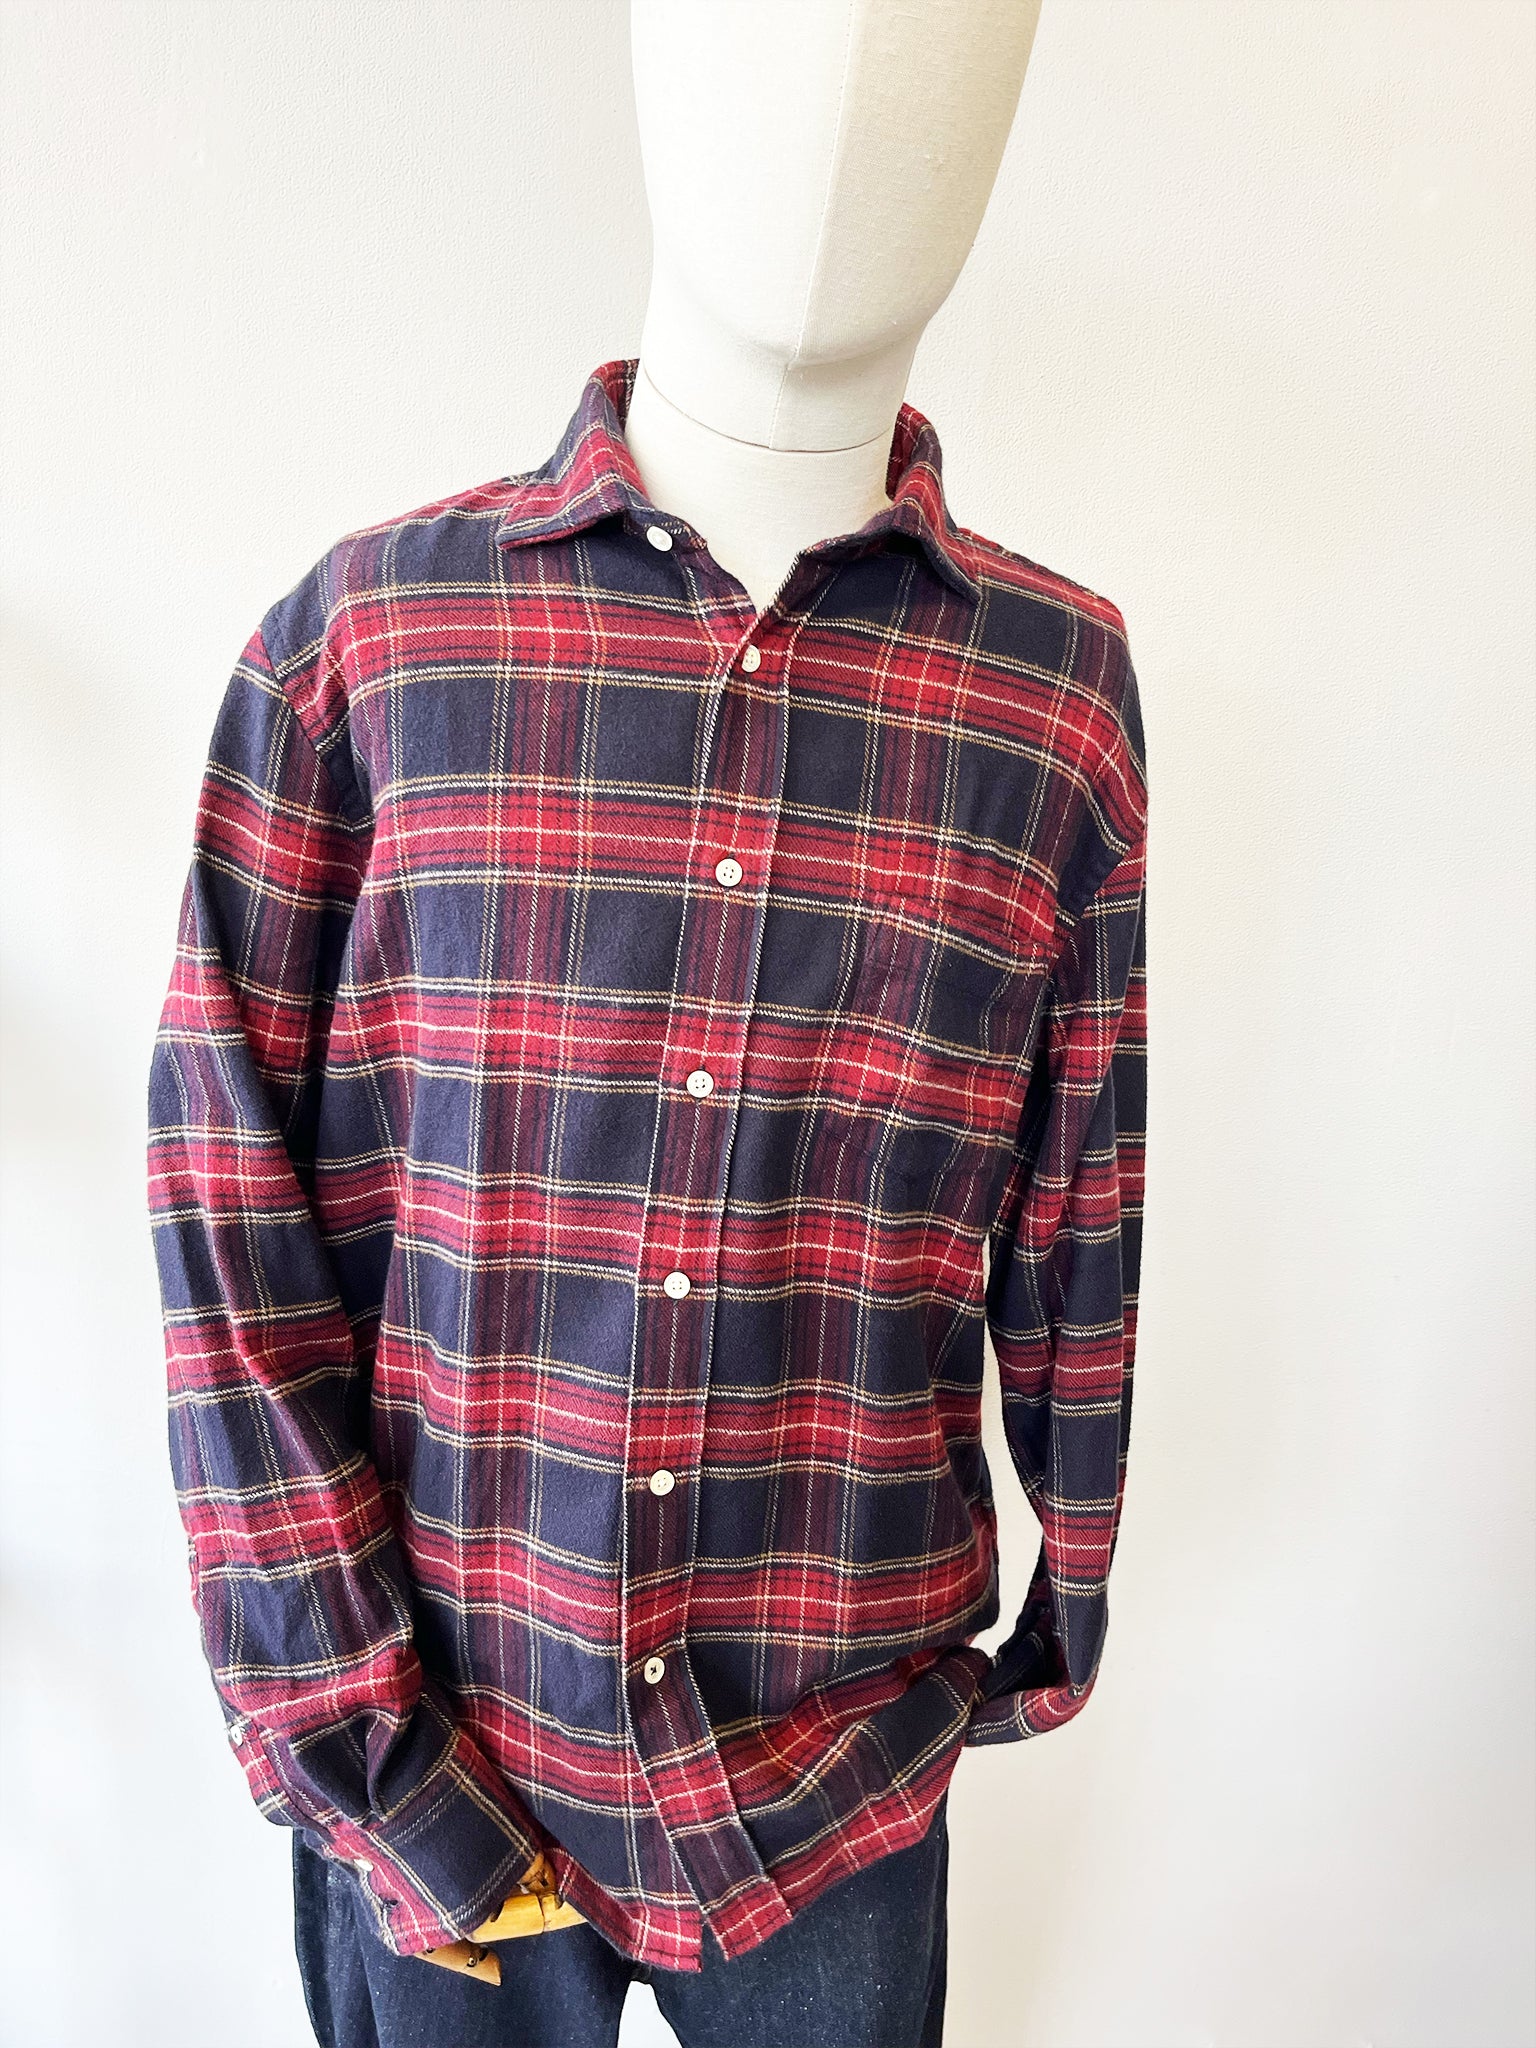 Hartford Woven Paul Shirt in Red & Navy Plaid on a mannequin